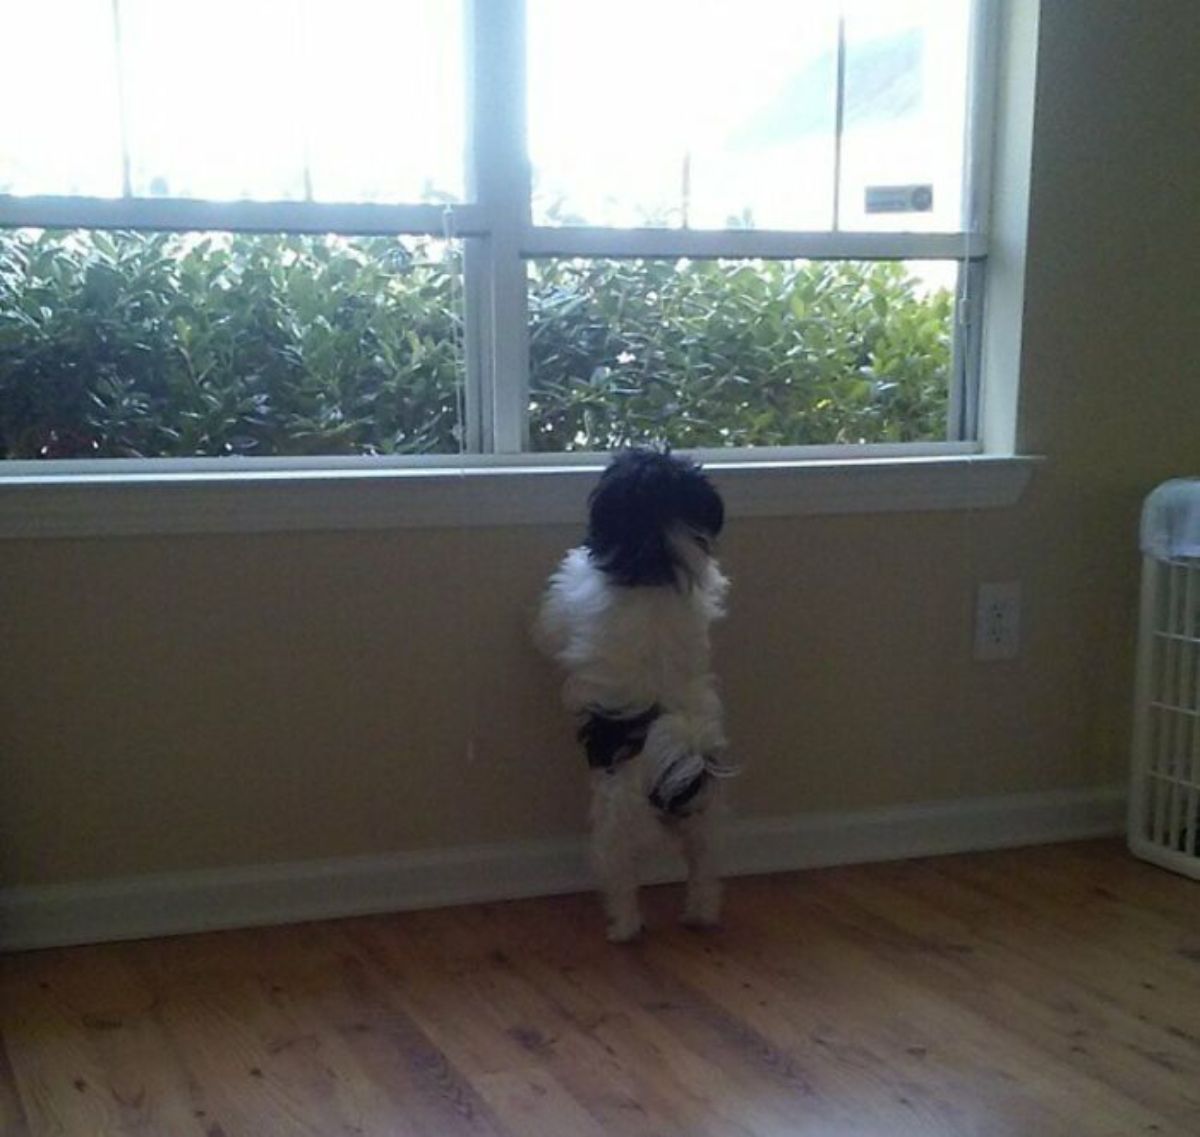 small black and white dog standing on hind legs by a window trying to look outside